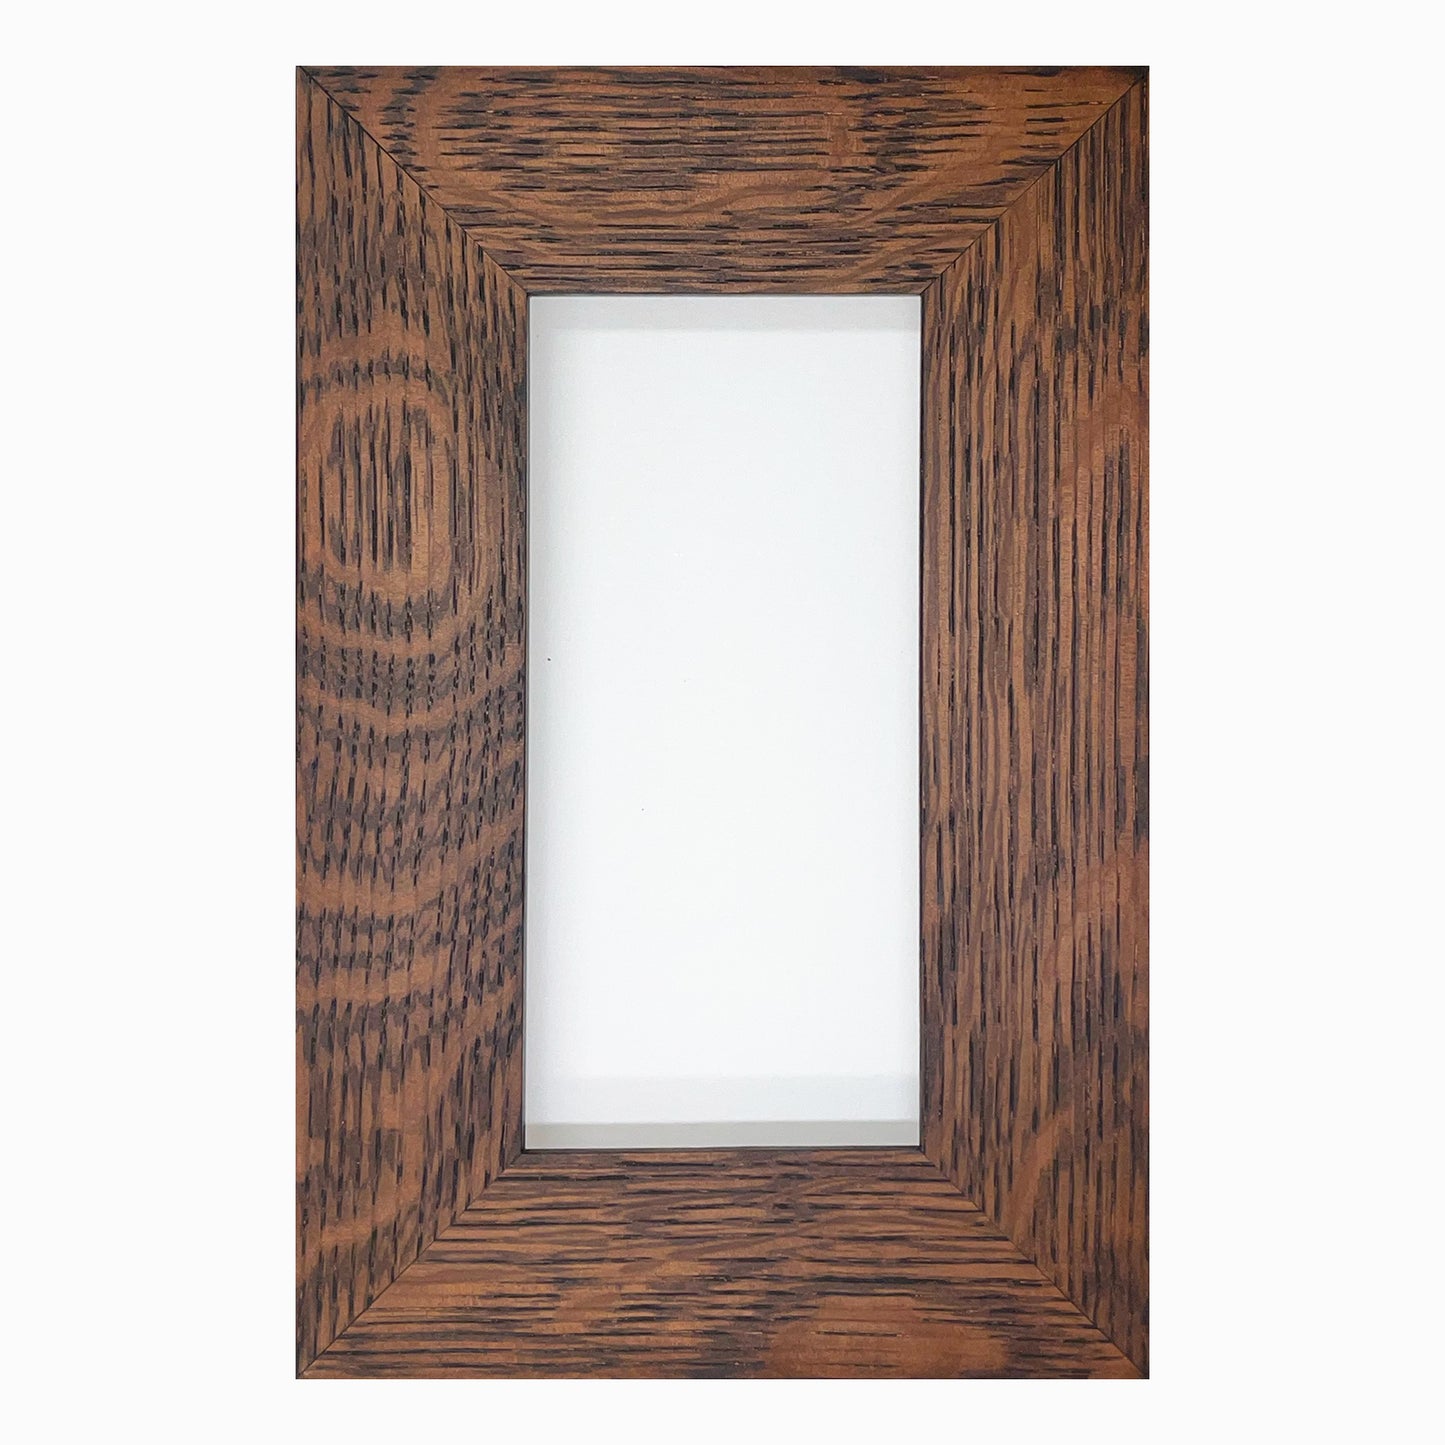 Quarter-sawn oak frame handmade by Family Woodworks.   A museum quality Arts and Crafts style frame for art tiles, pictures and/or paintings.